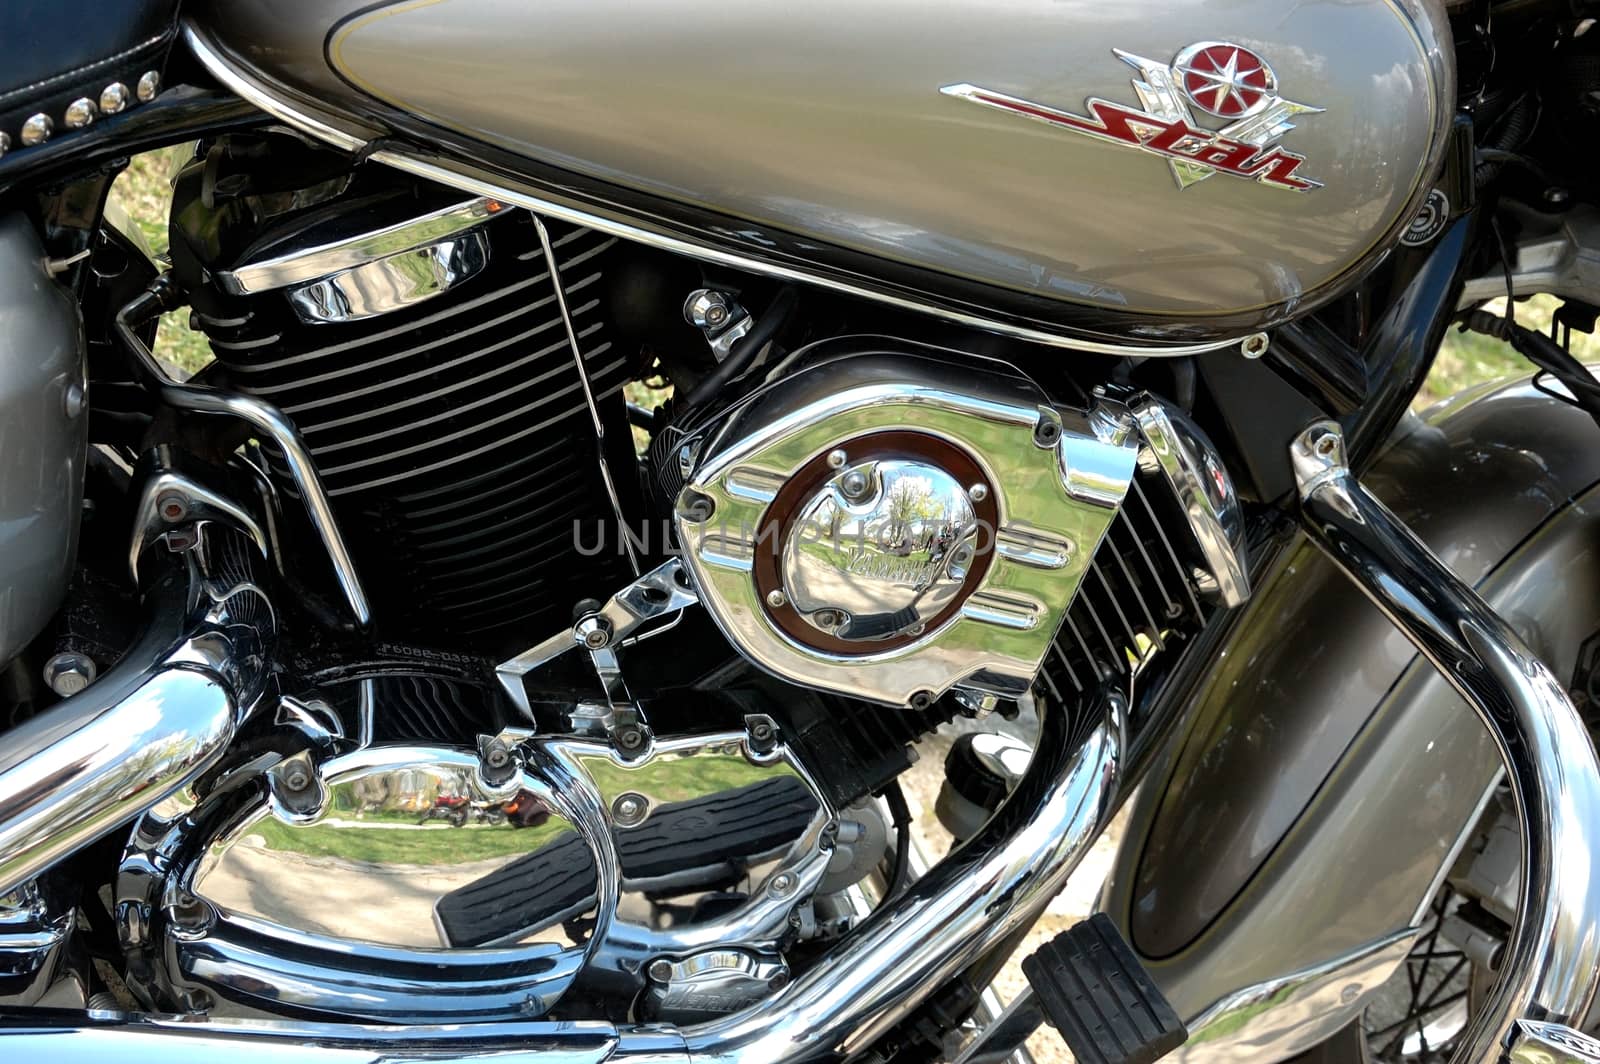 Closeup photo of motorbike engine with shiny chrome parts, different metal components.